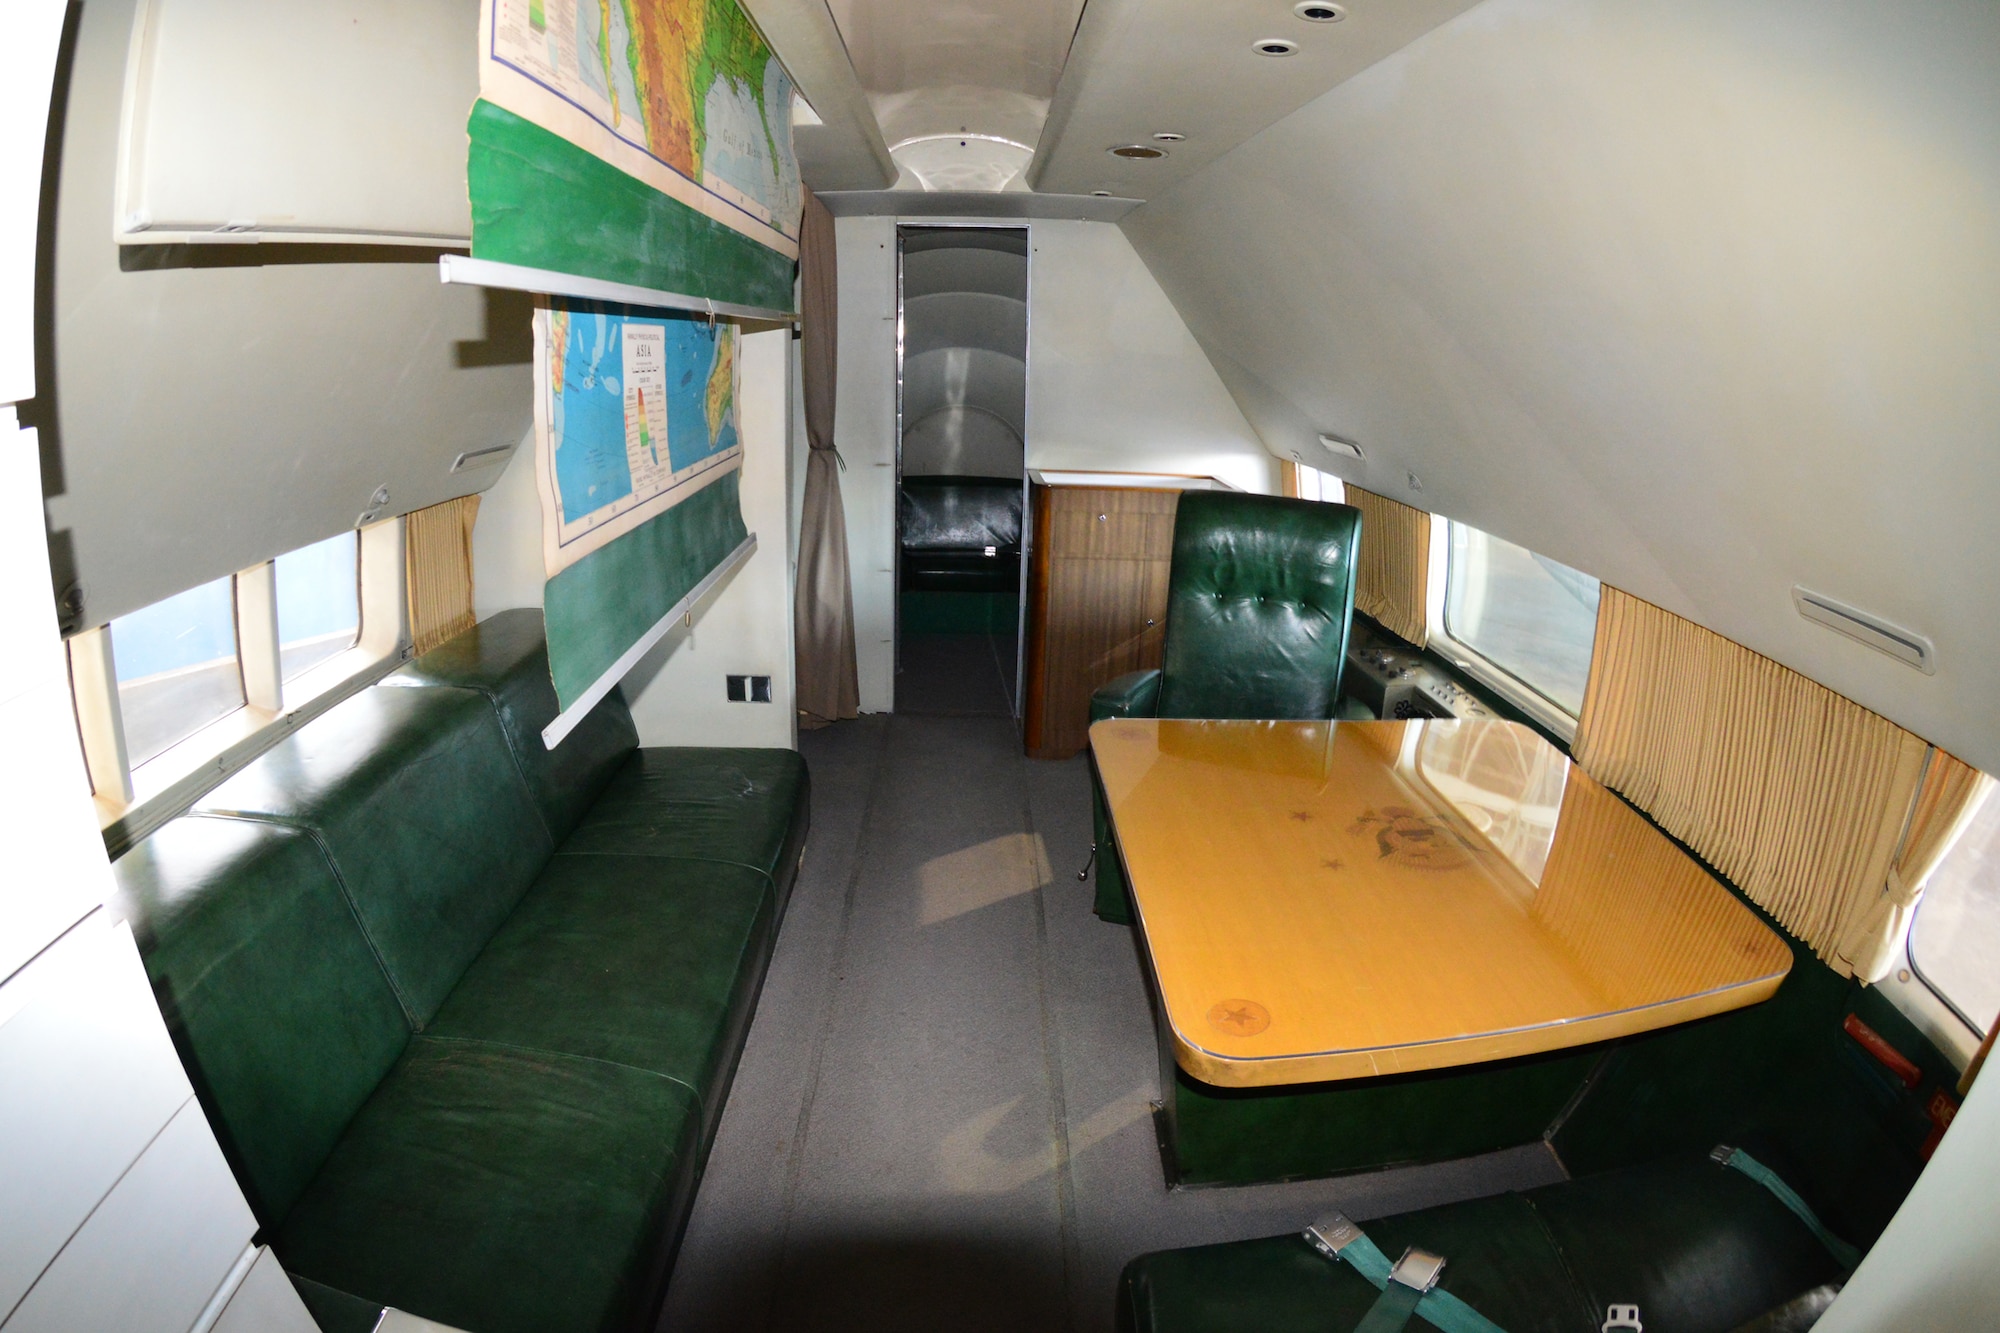 DAYTON, Ohio -- Douglas VC-118 "Independence" interior view in the Presidential Gallery at the National Museum of the United States Air Force. (U.S. Air Force photo by Ken LaRock) 